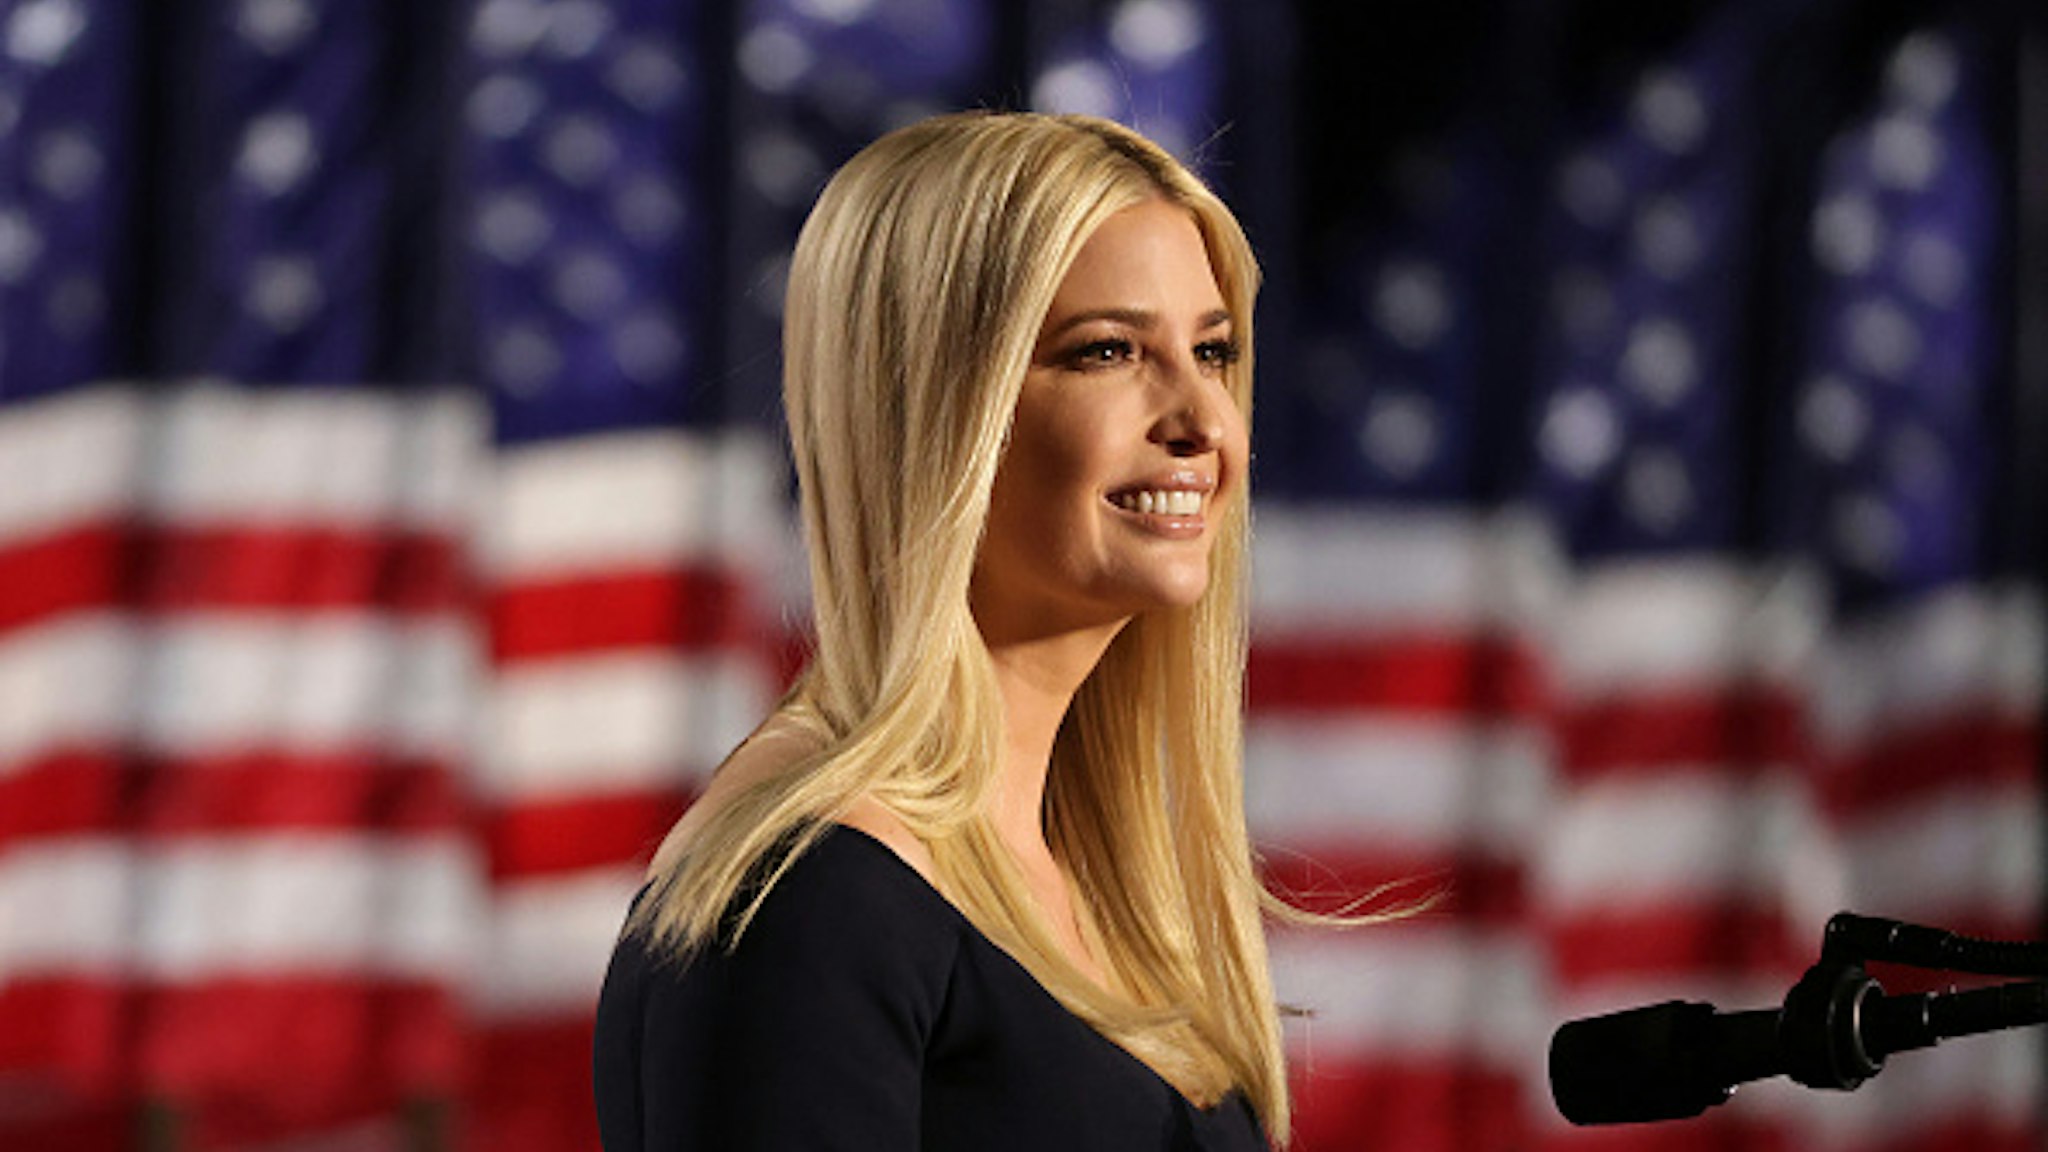 WASHINGTON, DC - AUGUST 27: Ivanka Trump, daughter of U.S. President Donald Trump and White House adviser, addresses attendees as Trump prepares to deliver his acceptance speech for the Republican presidential nomination on the South Lawn of the White House on August 27, 2020 in Washington, DC. President Trump is scheduled to deliver the speech in front of 1500 invited guests.